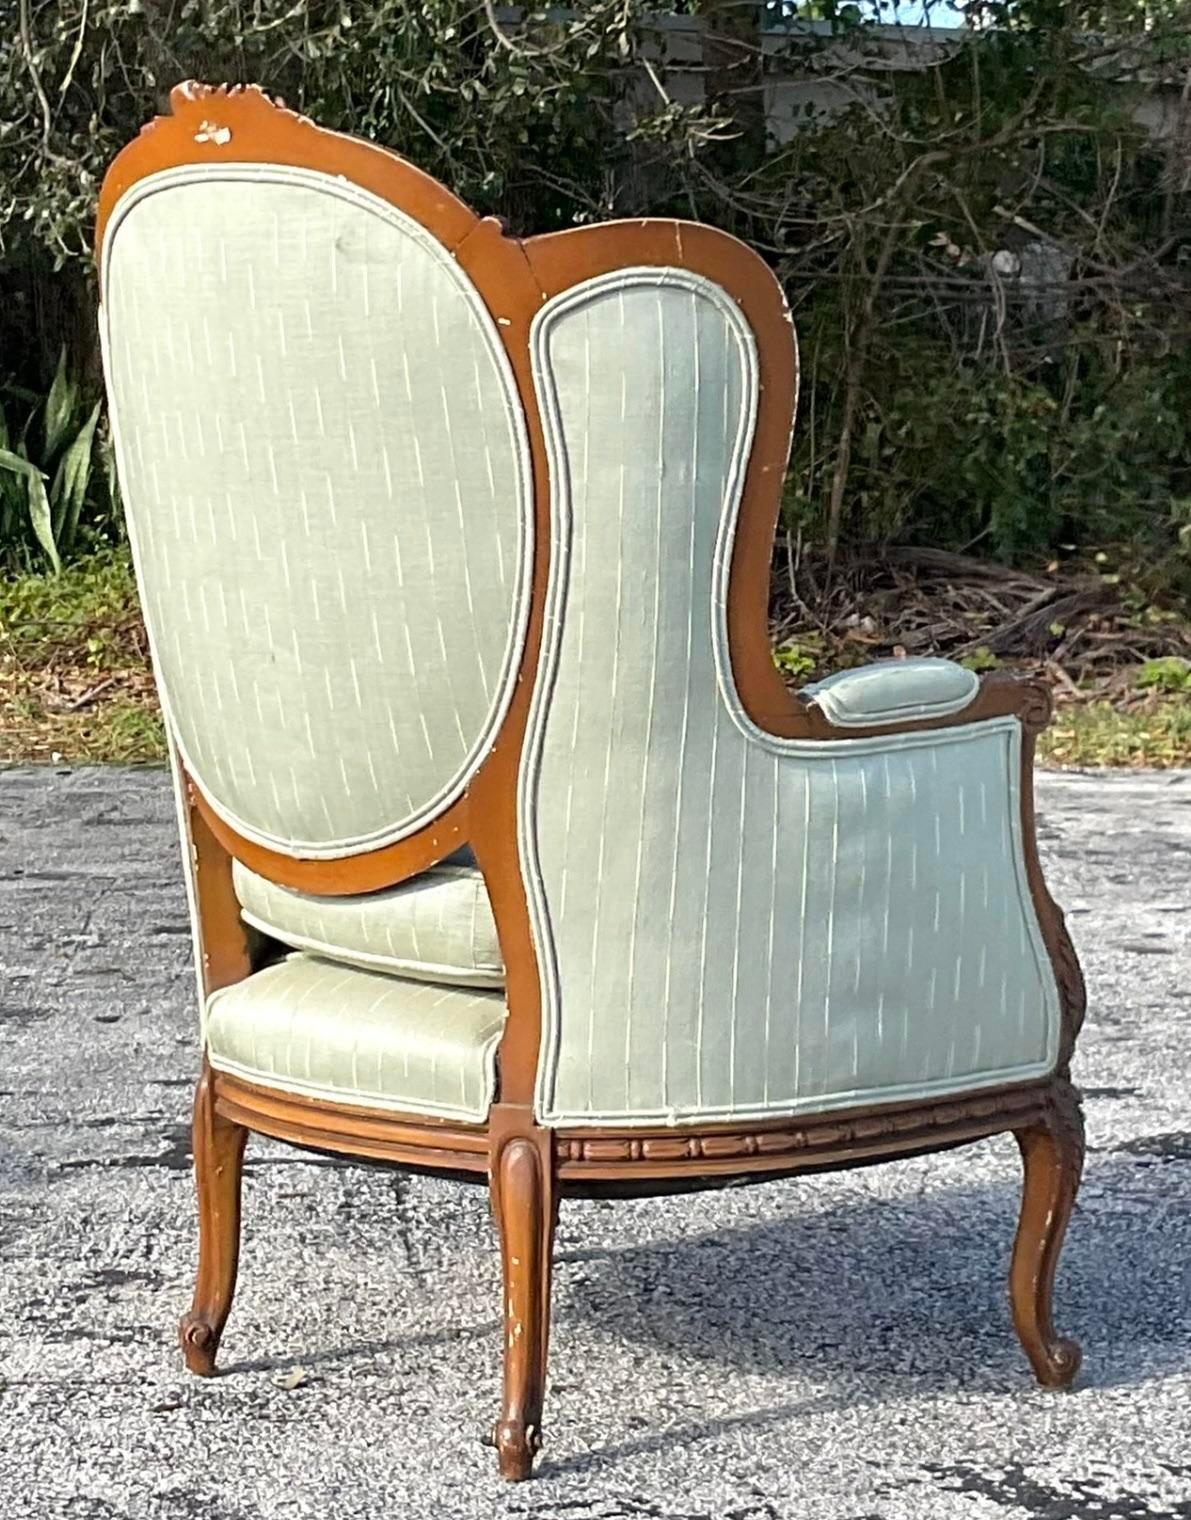 A stunning vintage wingback chair in a lovely sage green with a carefully carved wooden trim. Acquired at a Palm Beach estate.